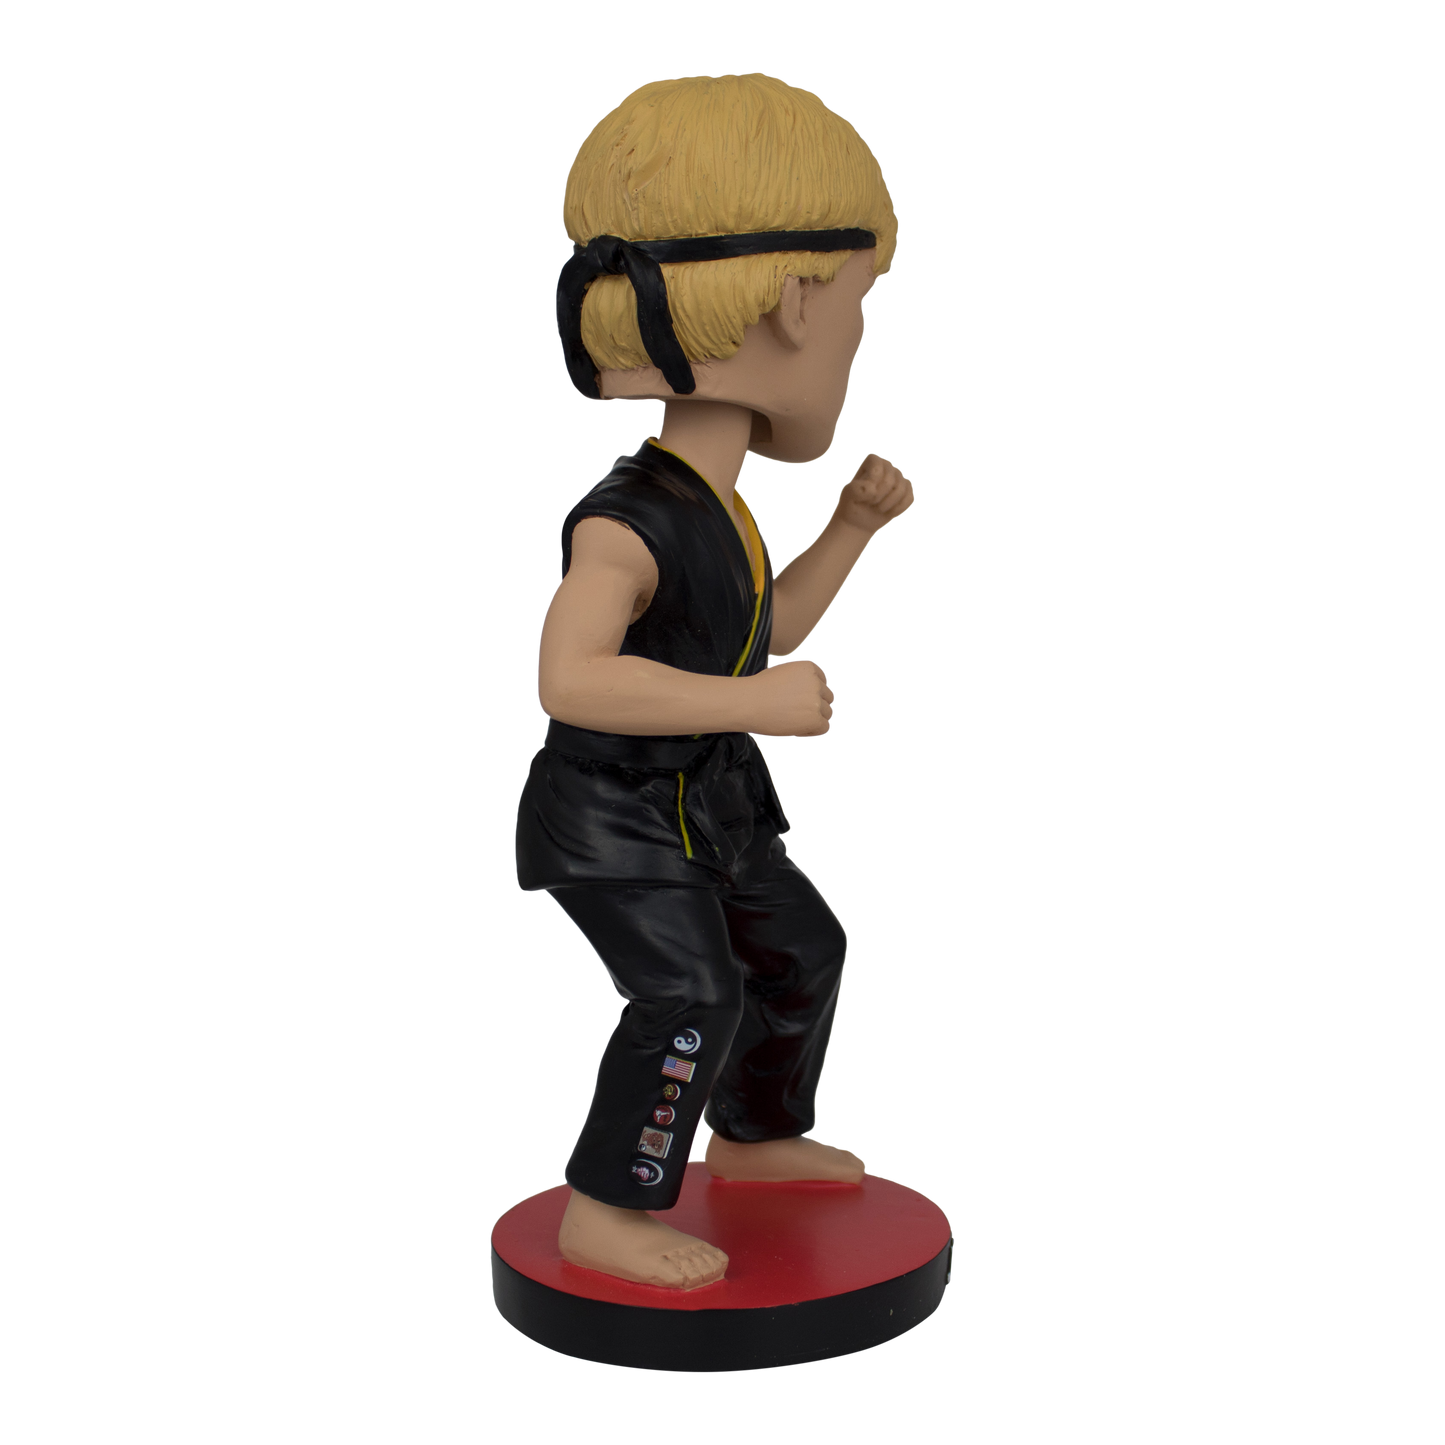 The Karate Kid Johnny Lawrence Polystone Bobblehead - Icon Heroes 